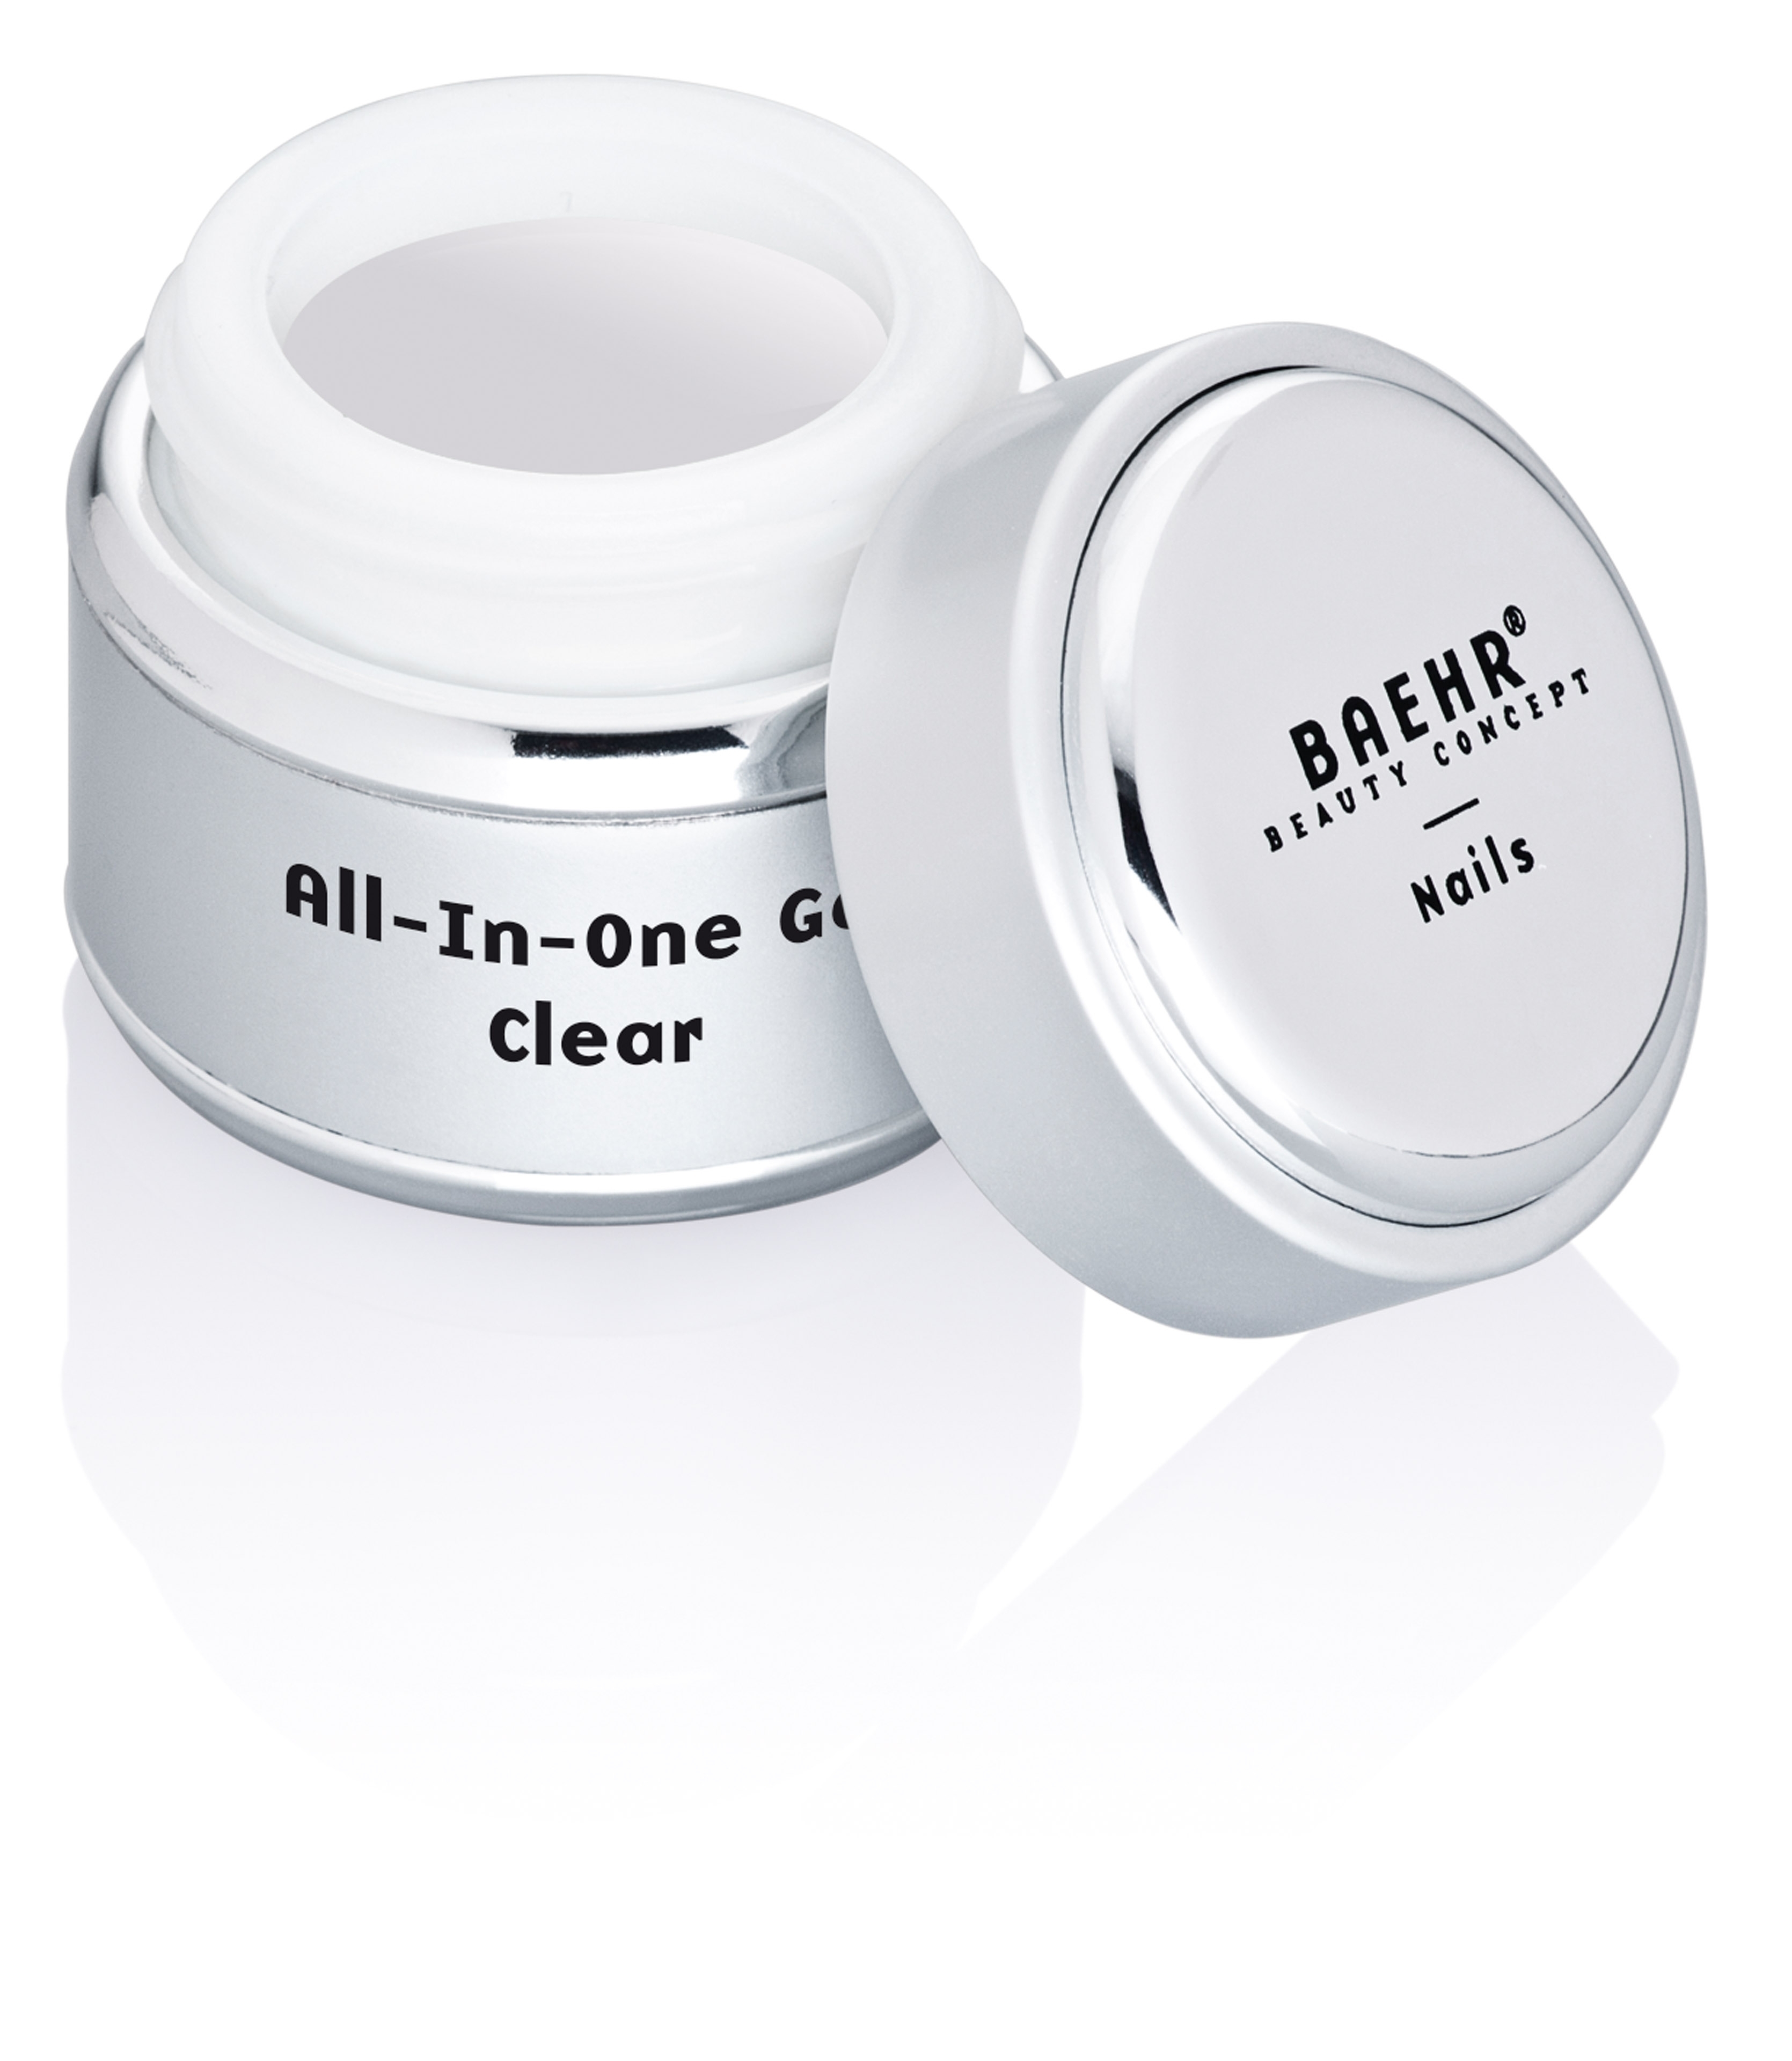 BAEHR BEAUTY CONCEPT - NAILS All-In-One Gel clear, UV & LED 5 ml